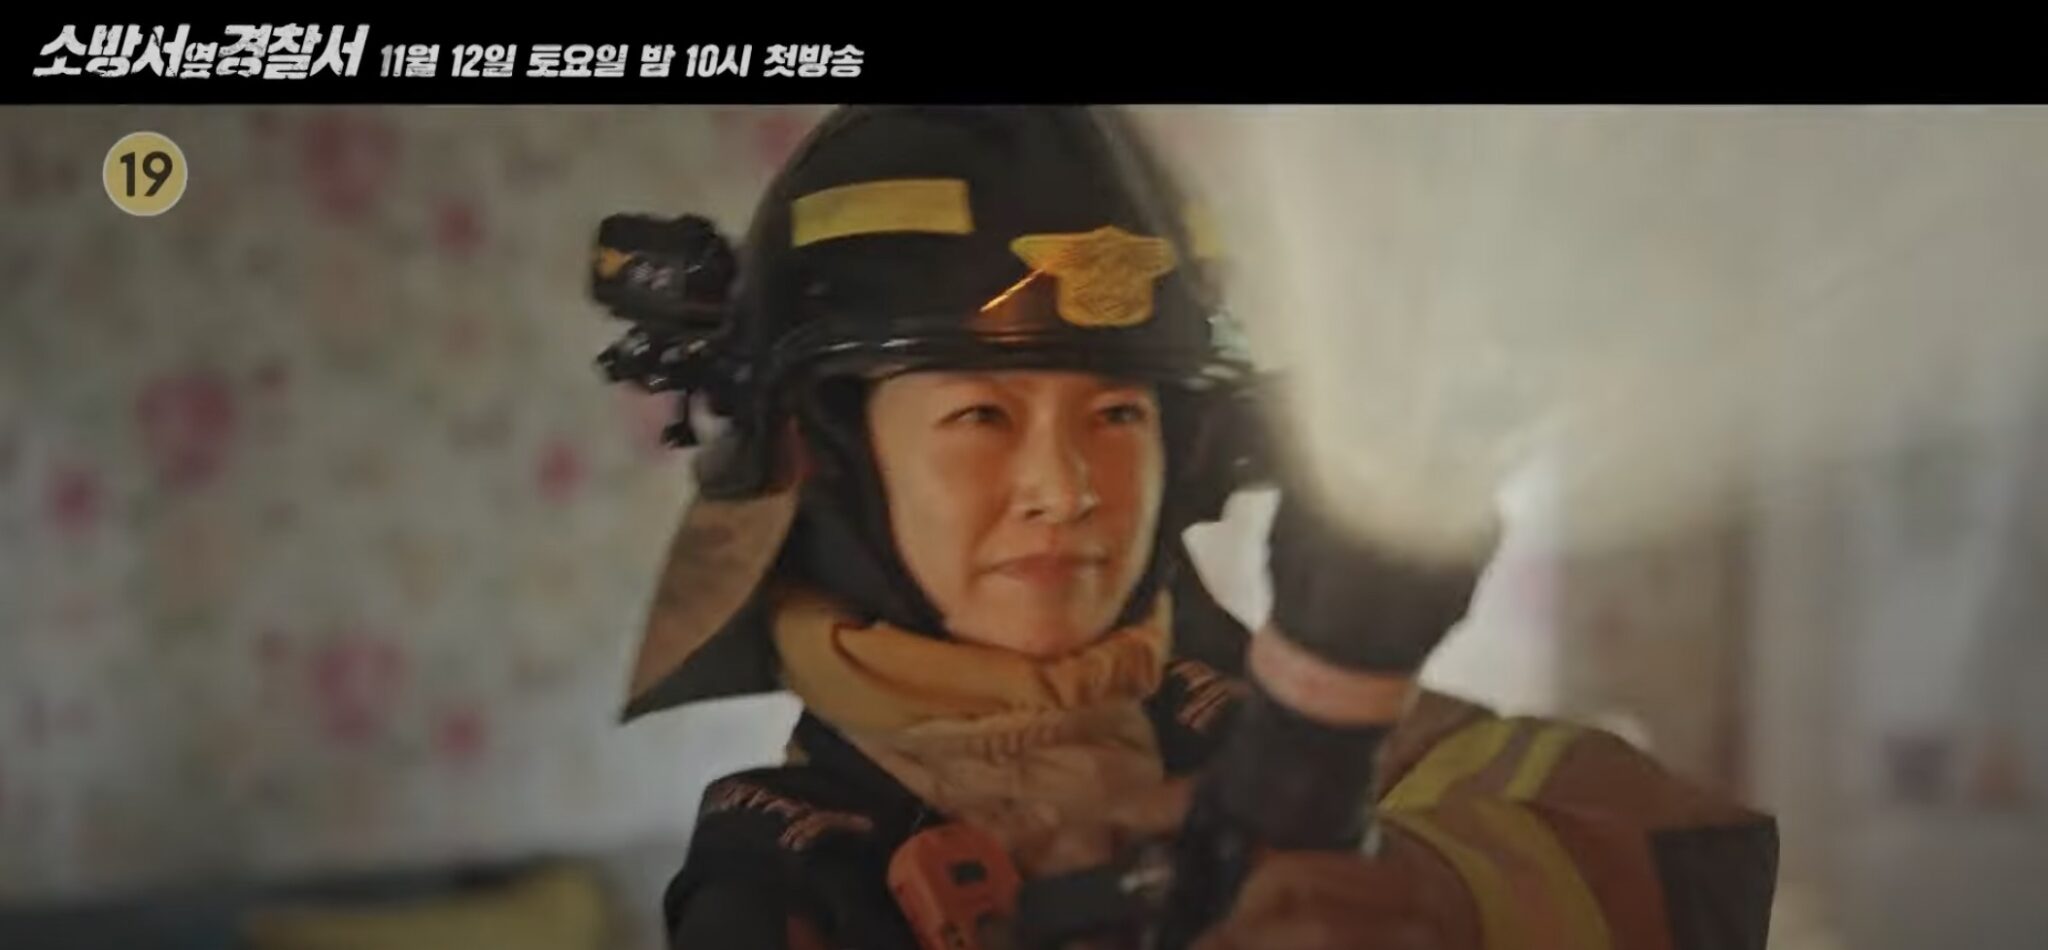 The First Responders come to the rescue in new teaser